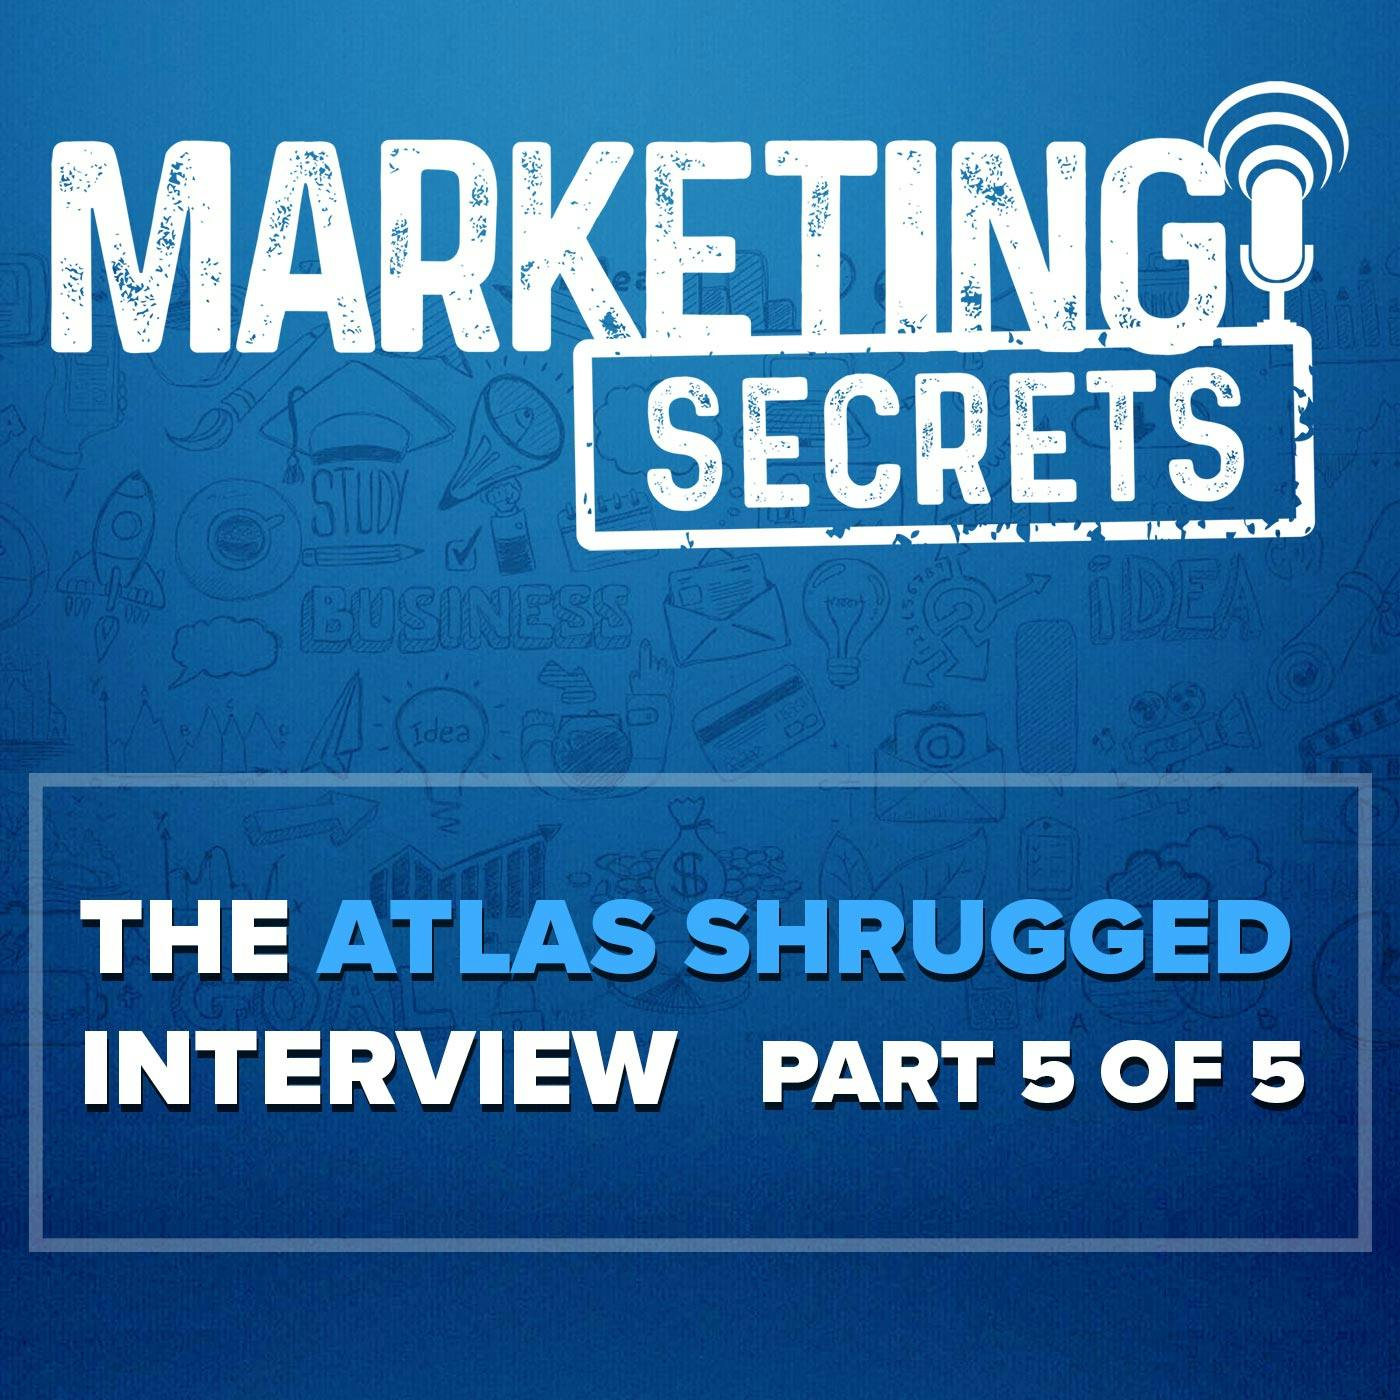 The Atlas Shrugged Interview - Part 5 of 5 by Russell Brunson